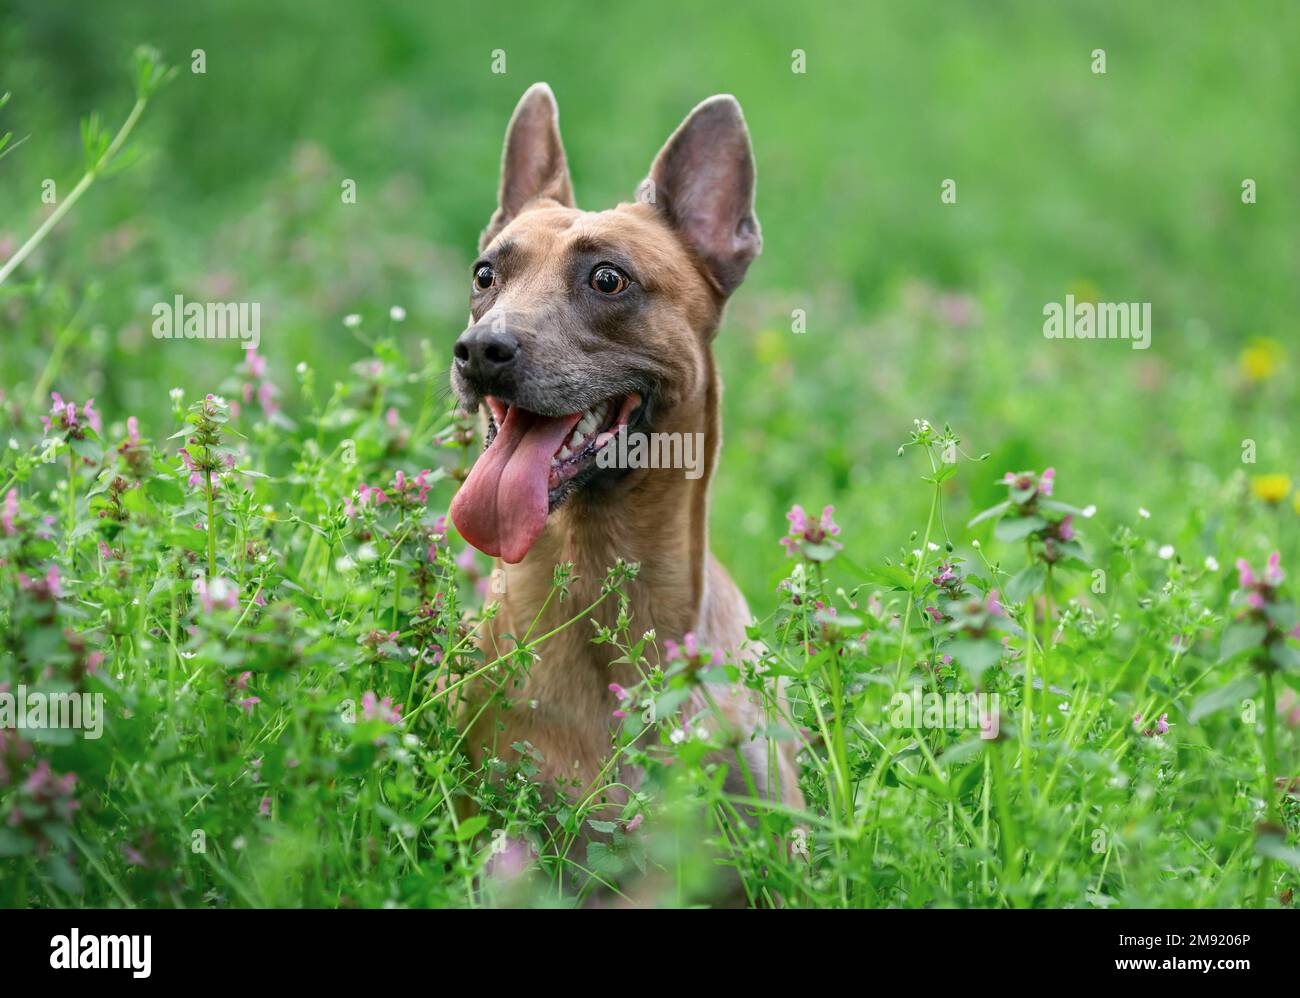 Funny happy dog of belgian malinois breed sitting in the green grass at summer Stock Photo